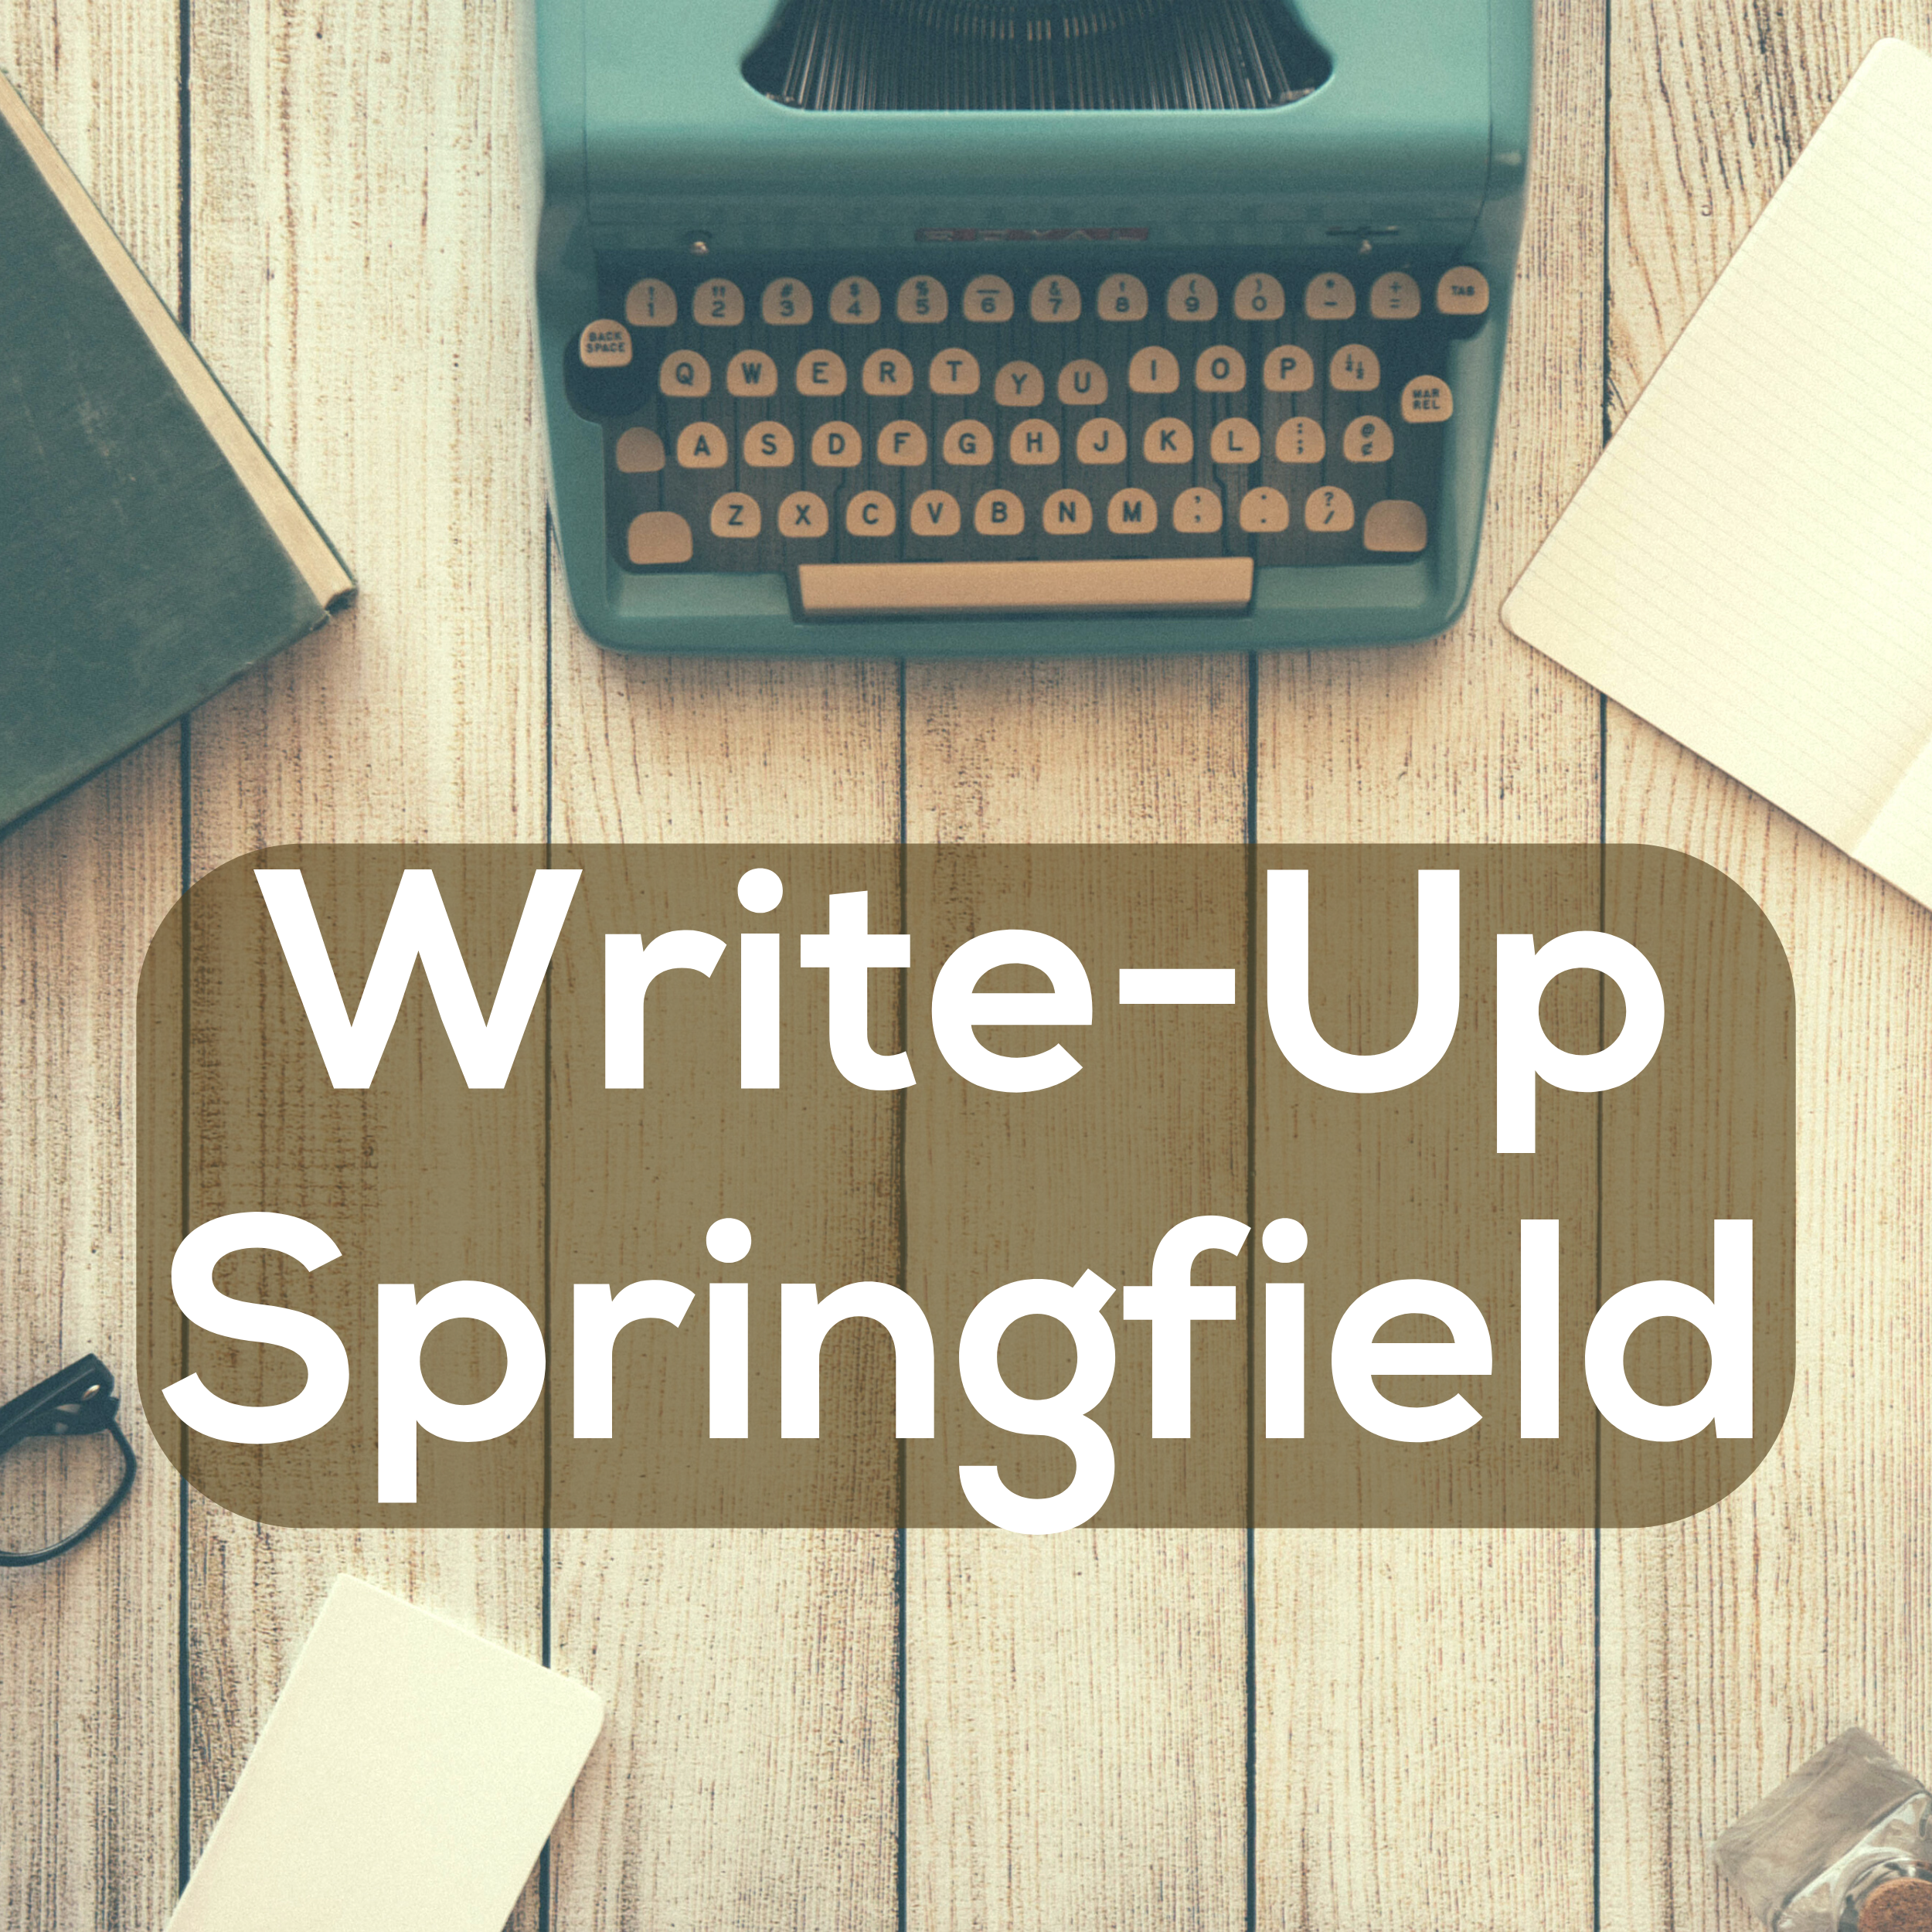 Write-Up Springfield default image: typewriter, pine cone, pencil and paper, eraser, glasses